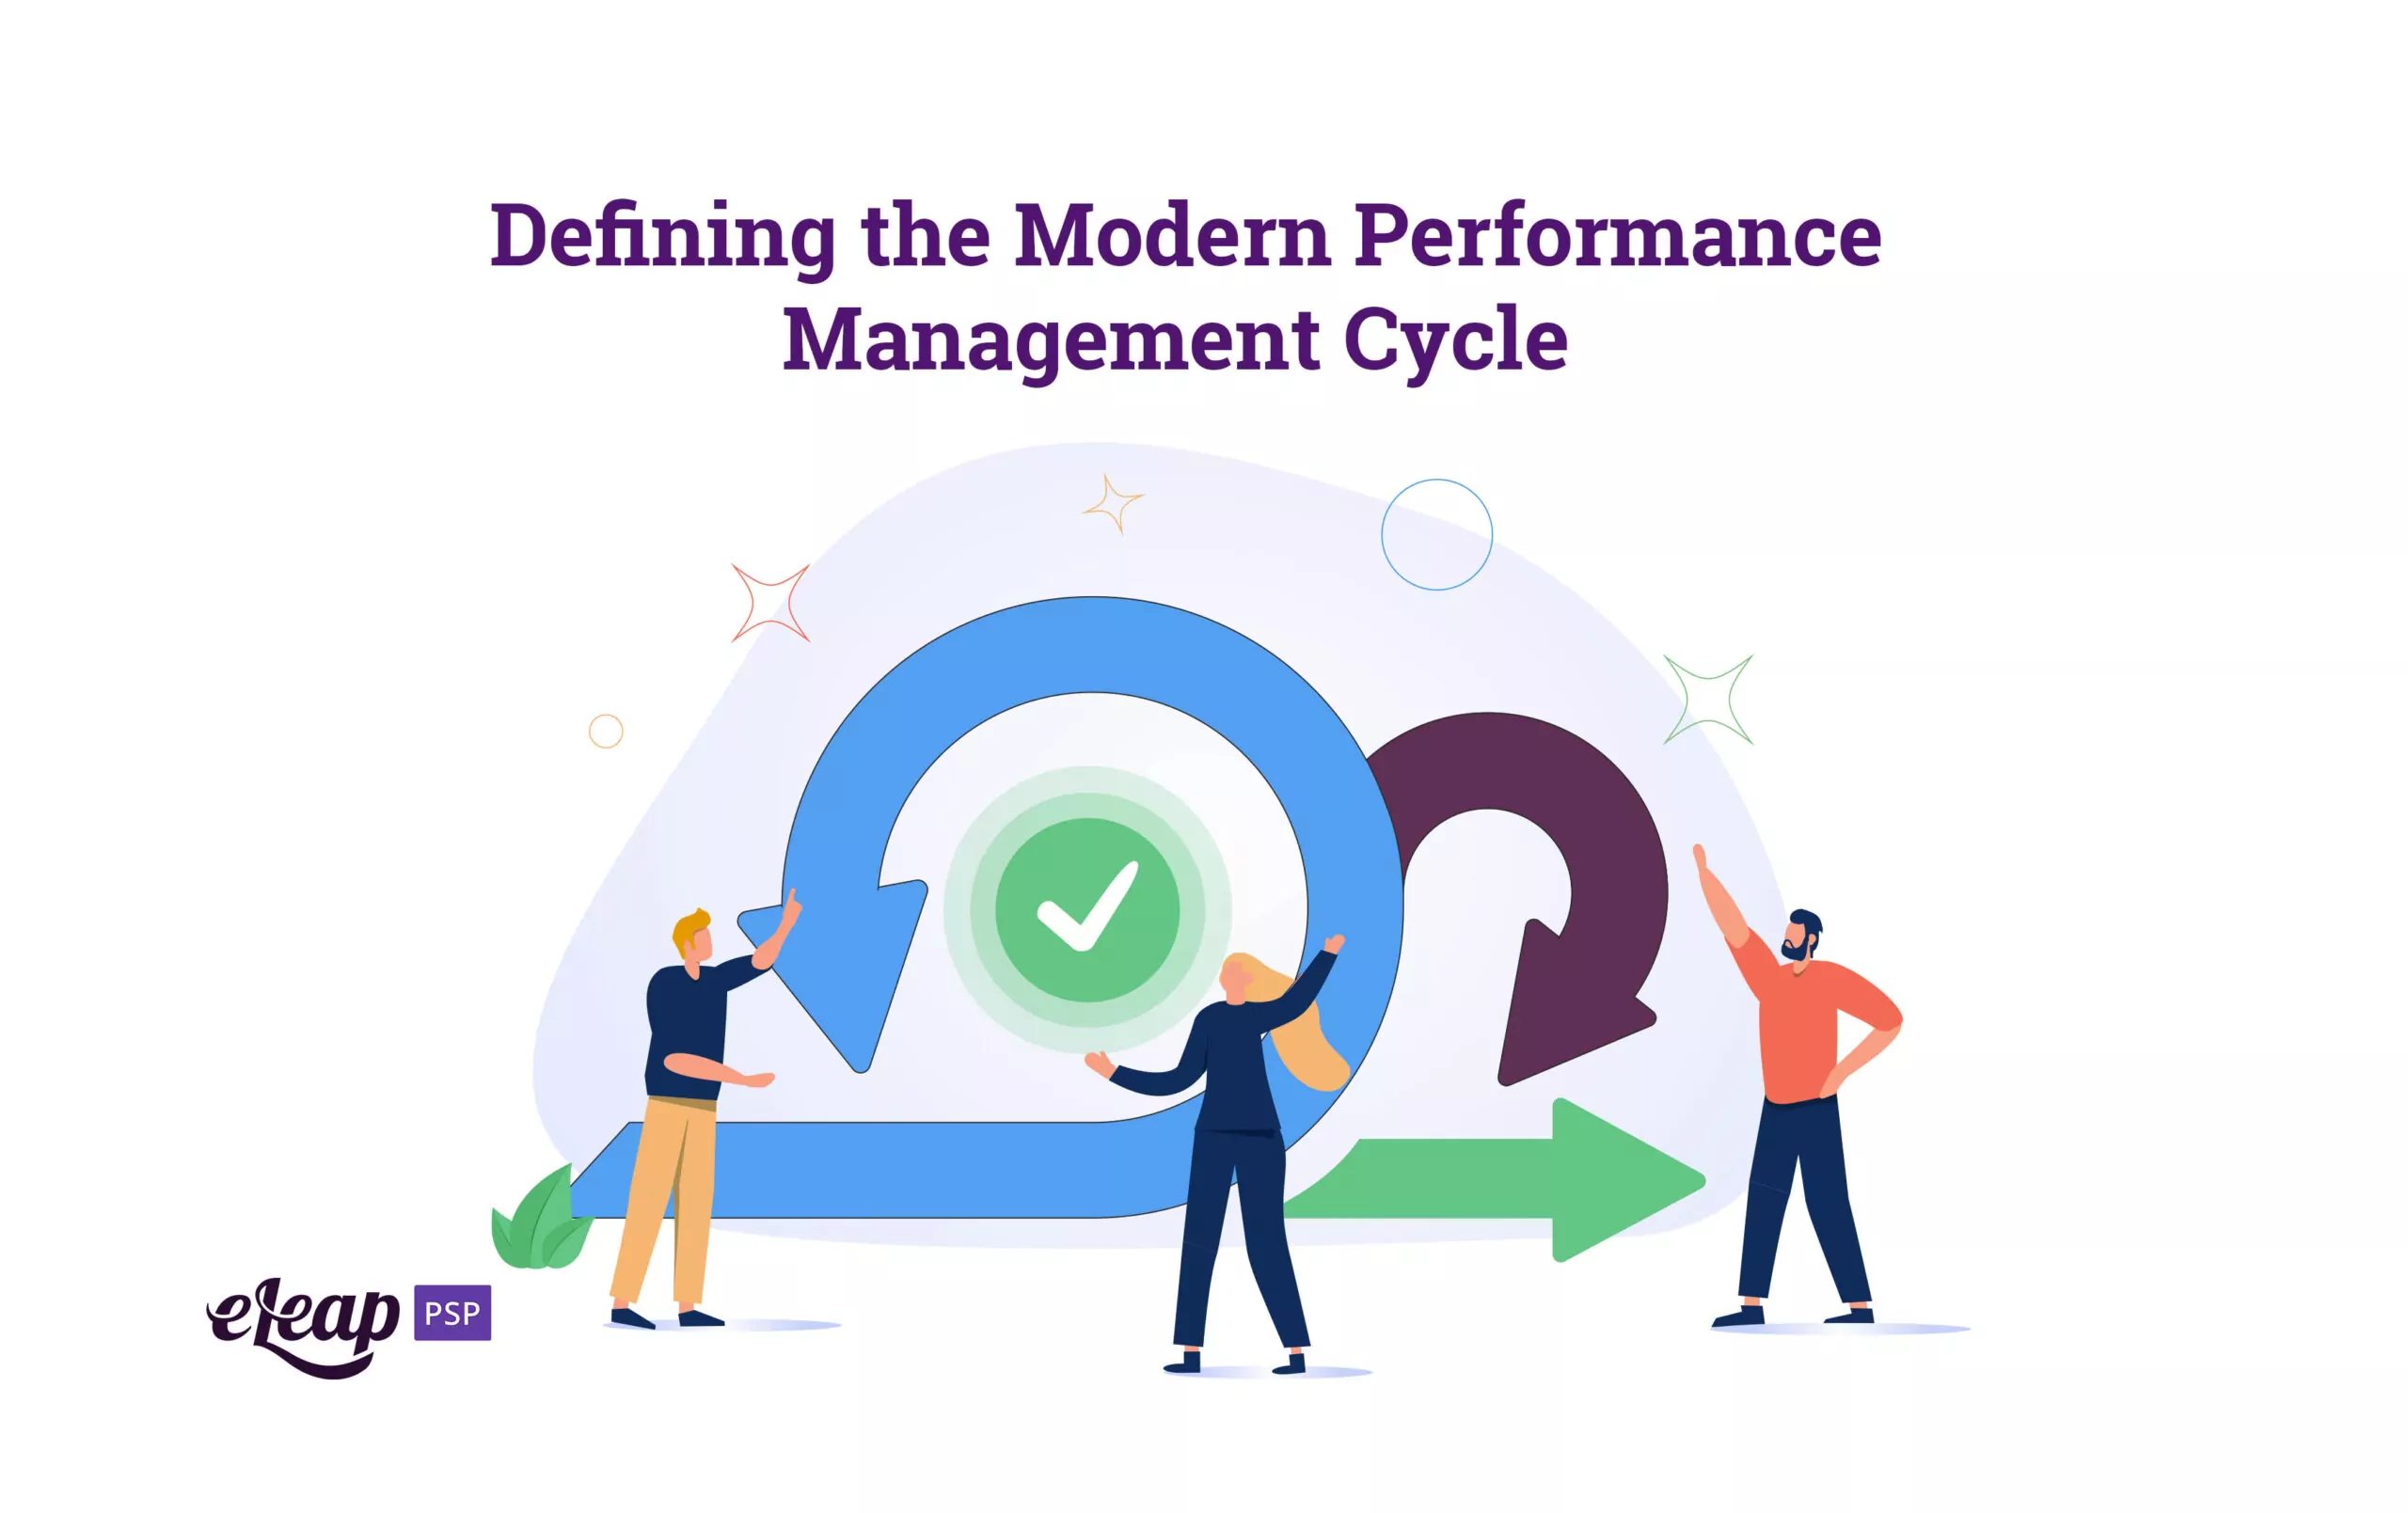 Defining the Modern Performance Management Cycle